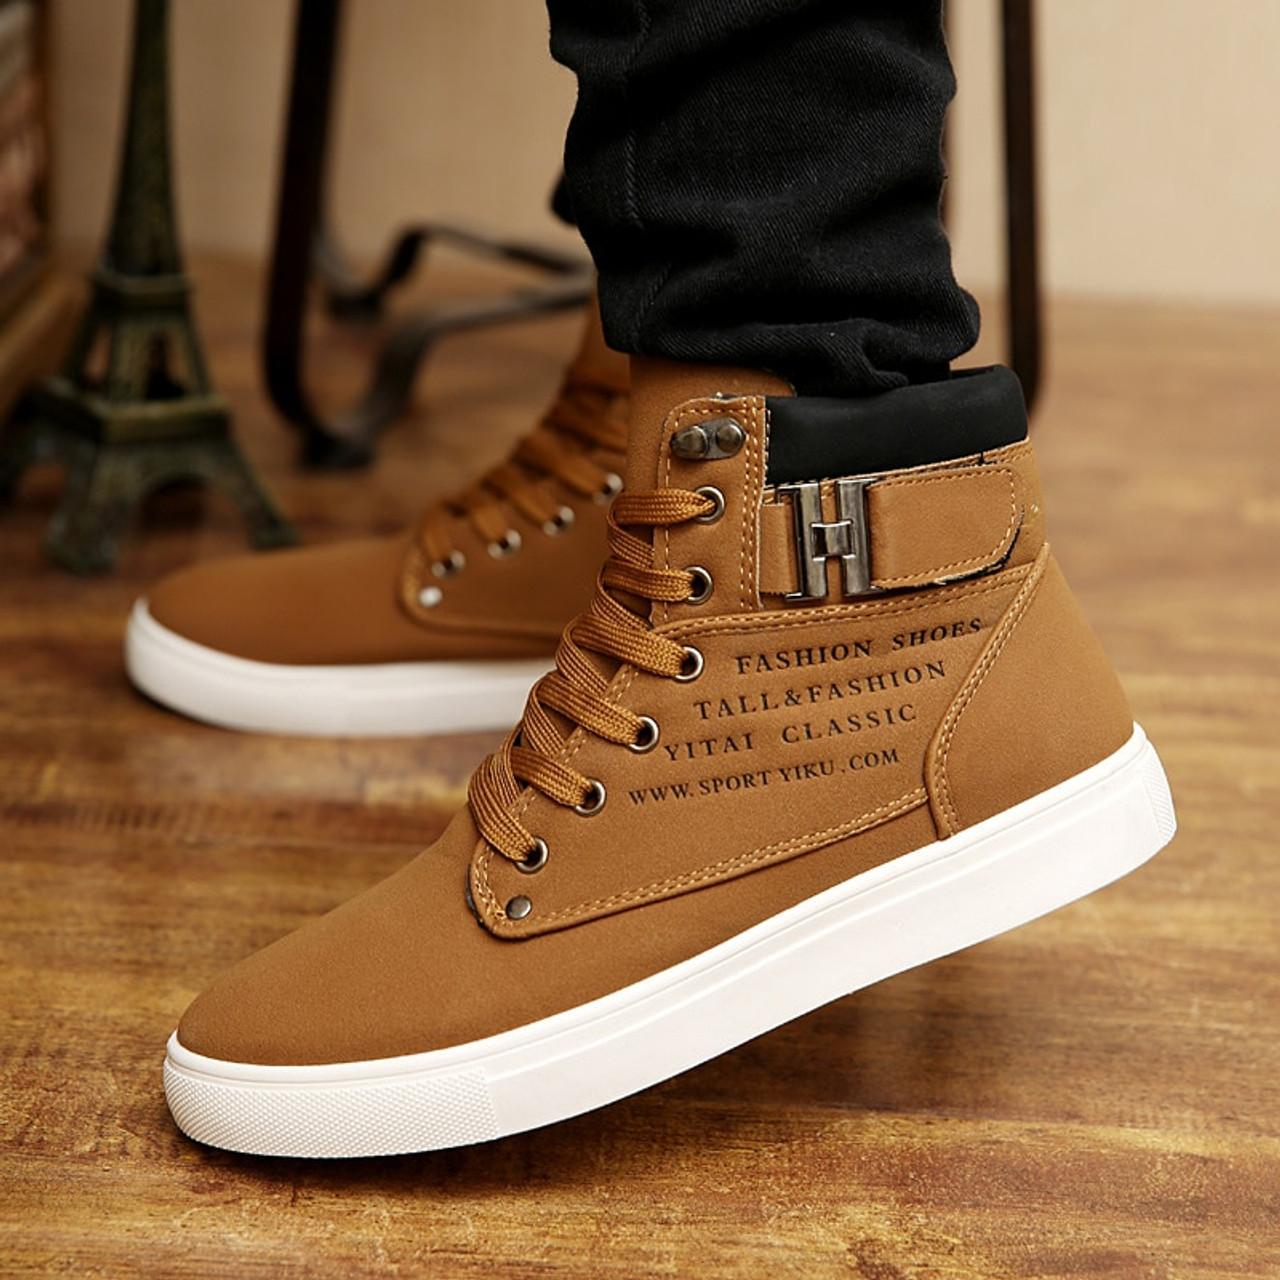 men's casual shoes with jeans 2018